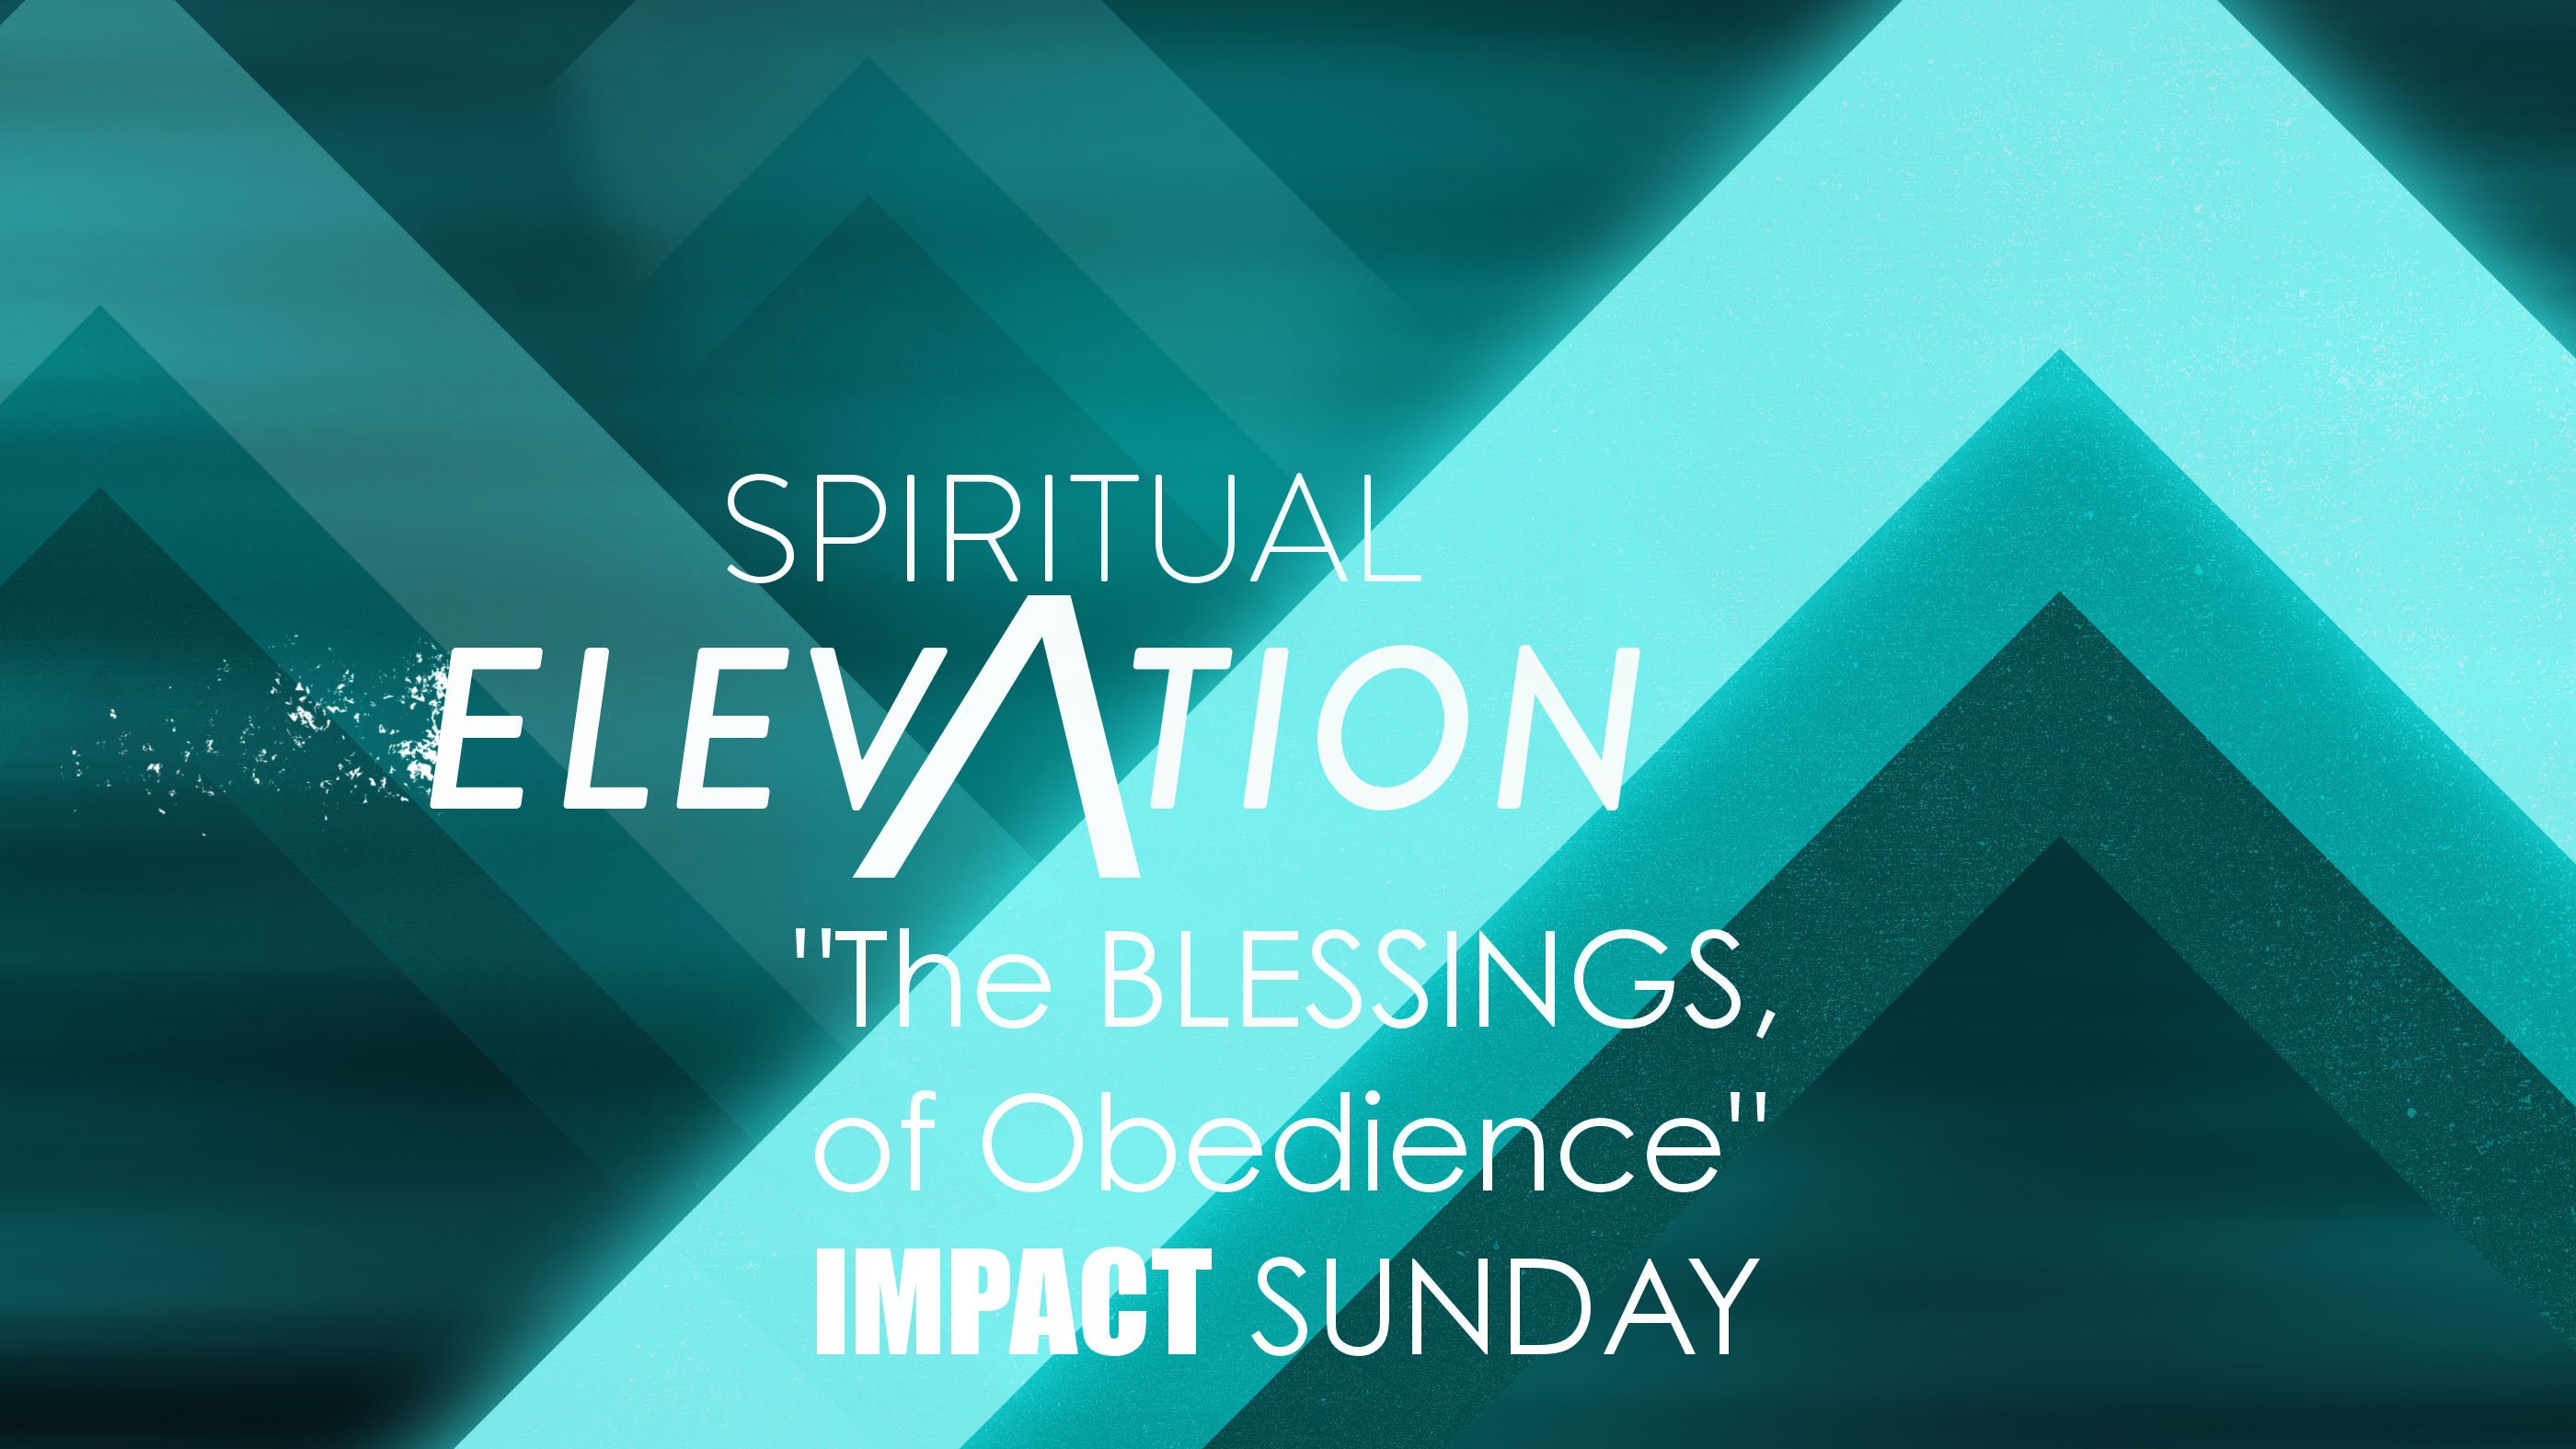 Spiritual Elevation - “The BLESSINGS of Obedience”